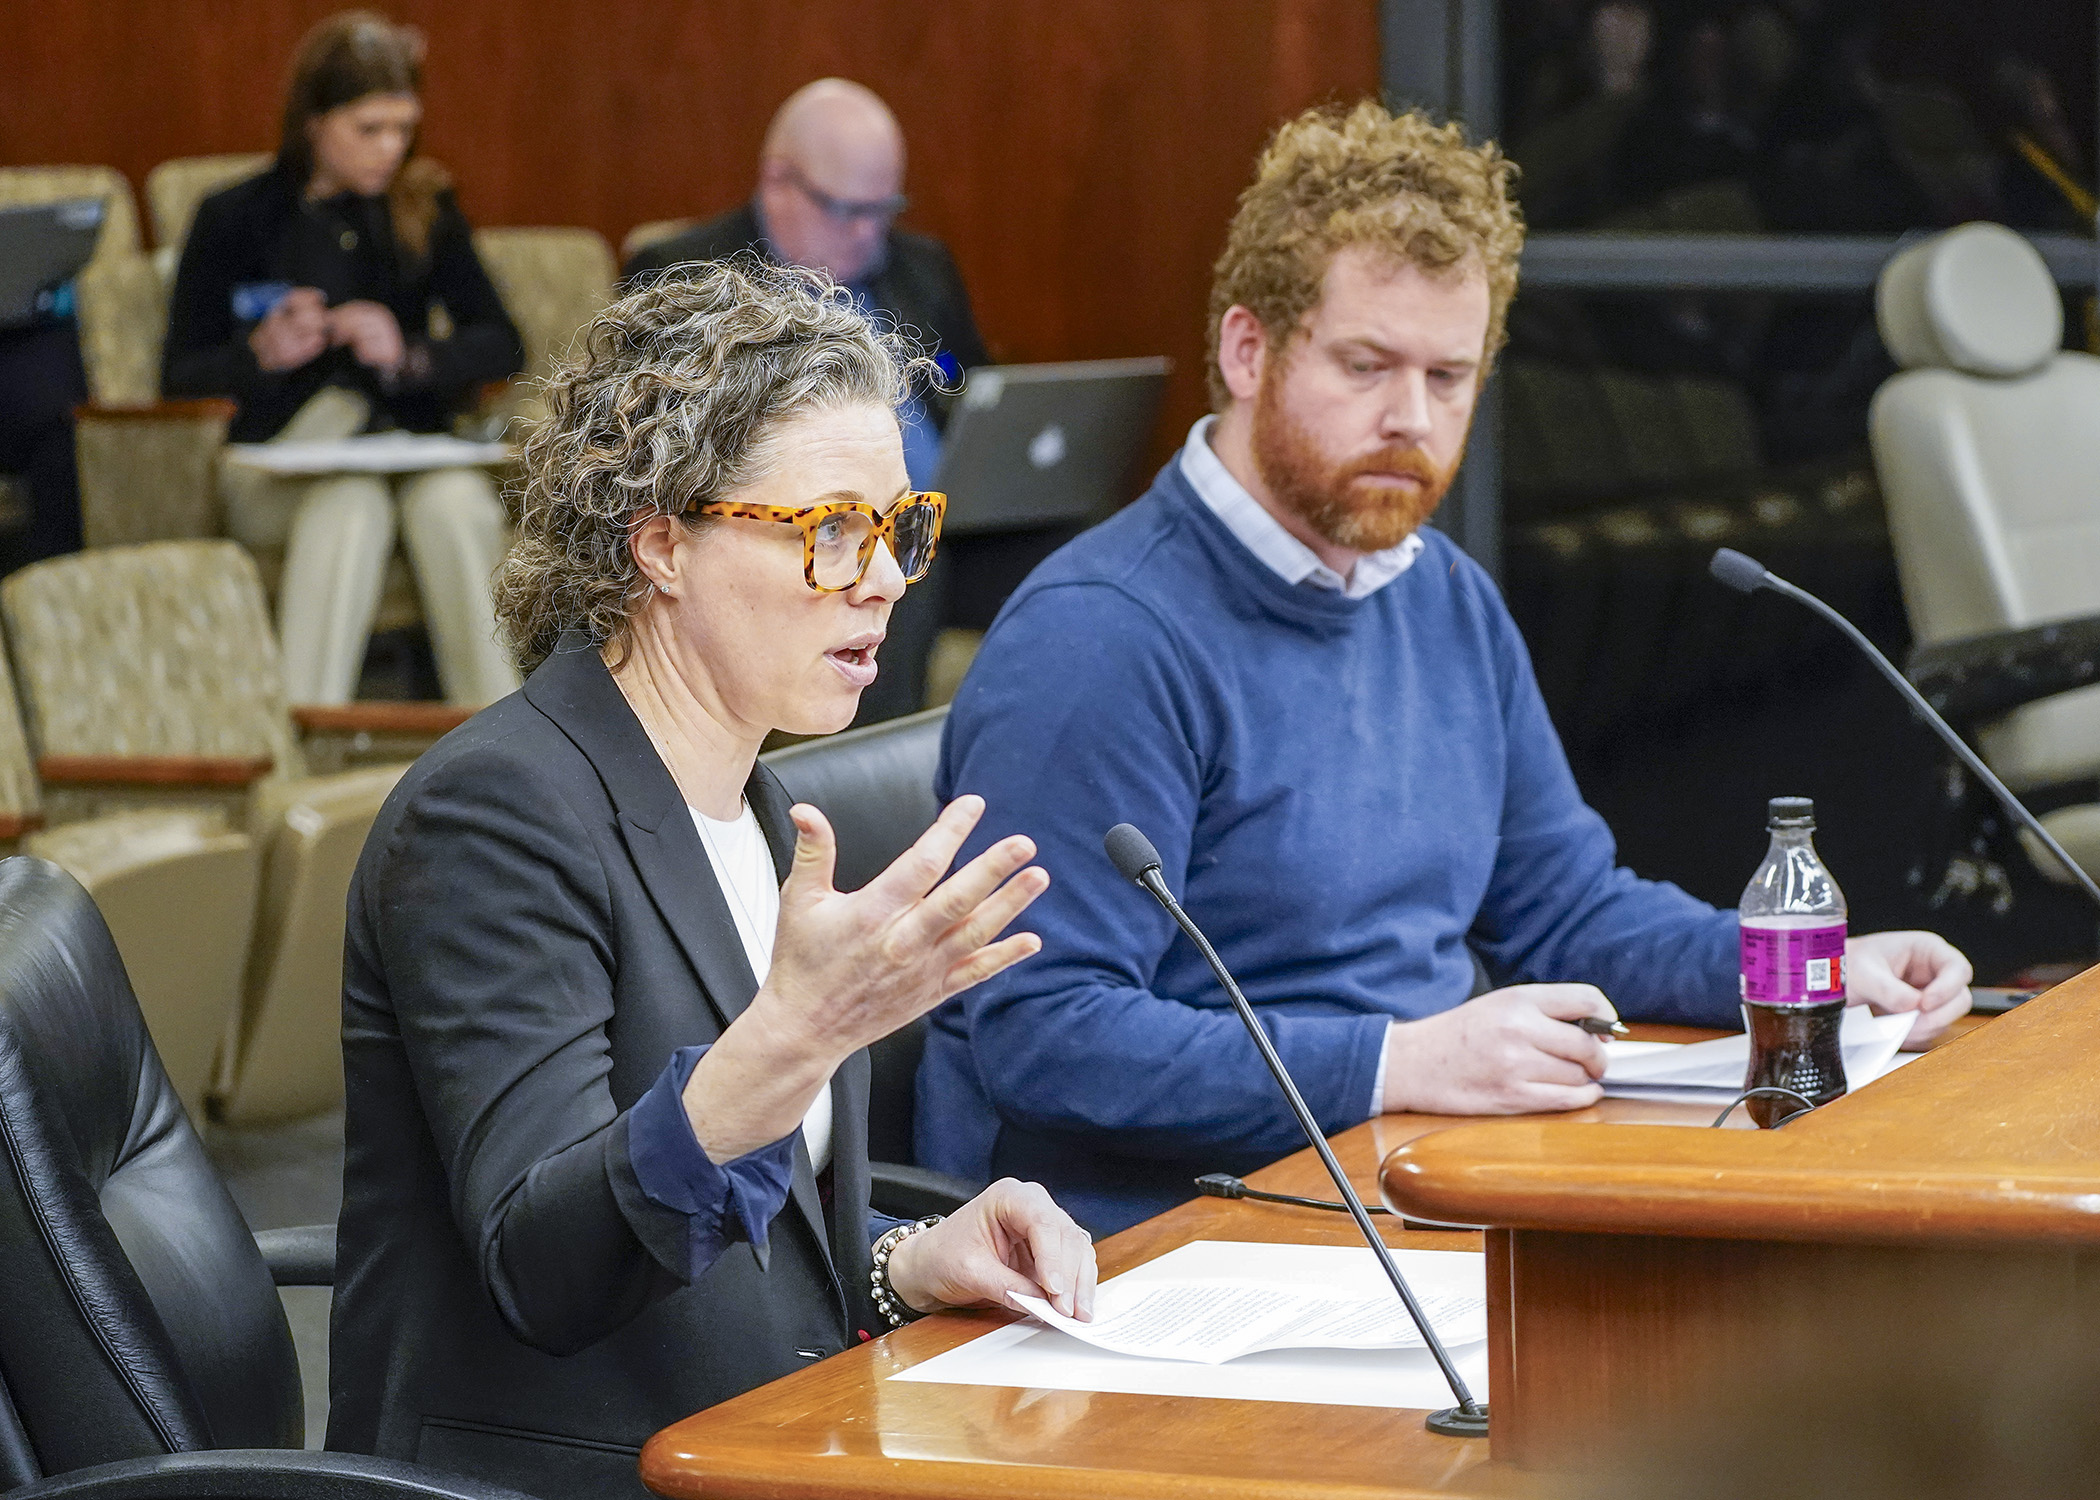 Dr. Sarah Traxler, chief medical officer for Planned Parenthood North Central States, testifies in support of a bill sponsored by Rep. Zack Stephenson, right, that would require health plans to cover abortions. (Photo by Andrew VonBank)